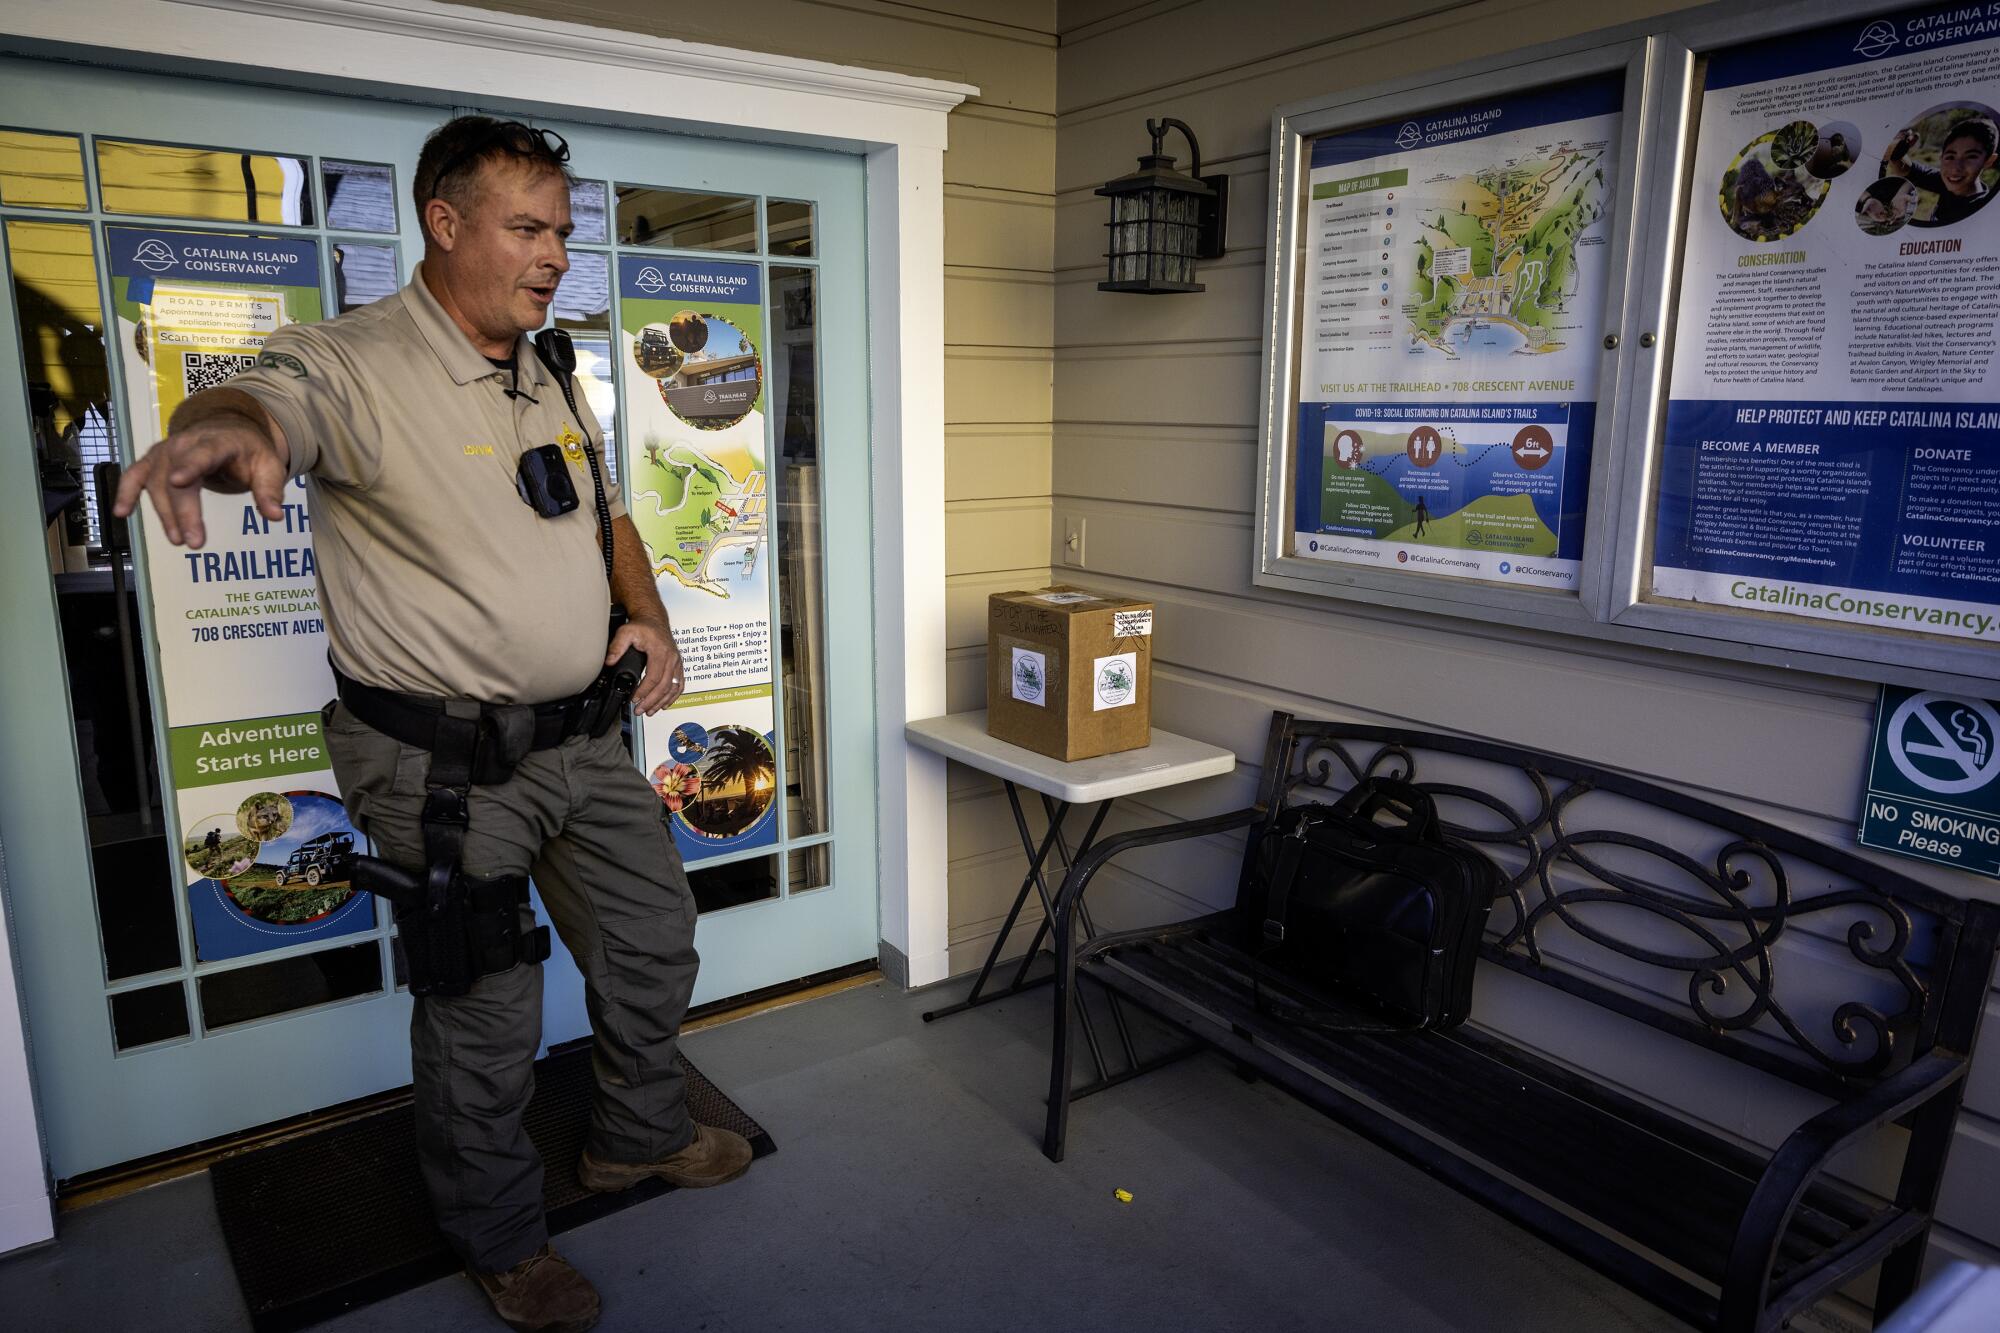 A sheriff's deputy gestures in the doorway of a building.